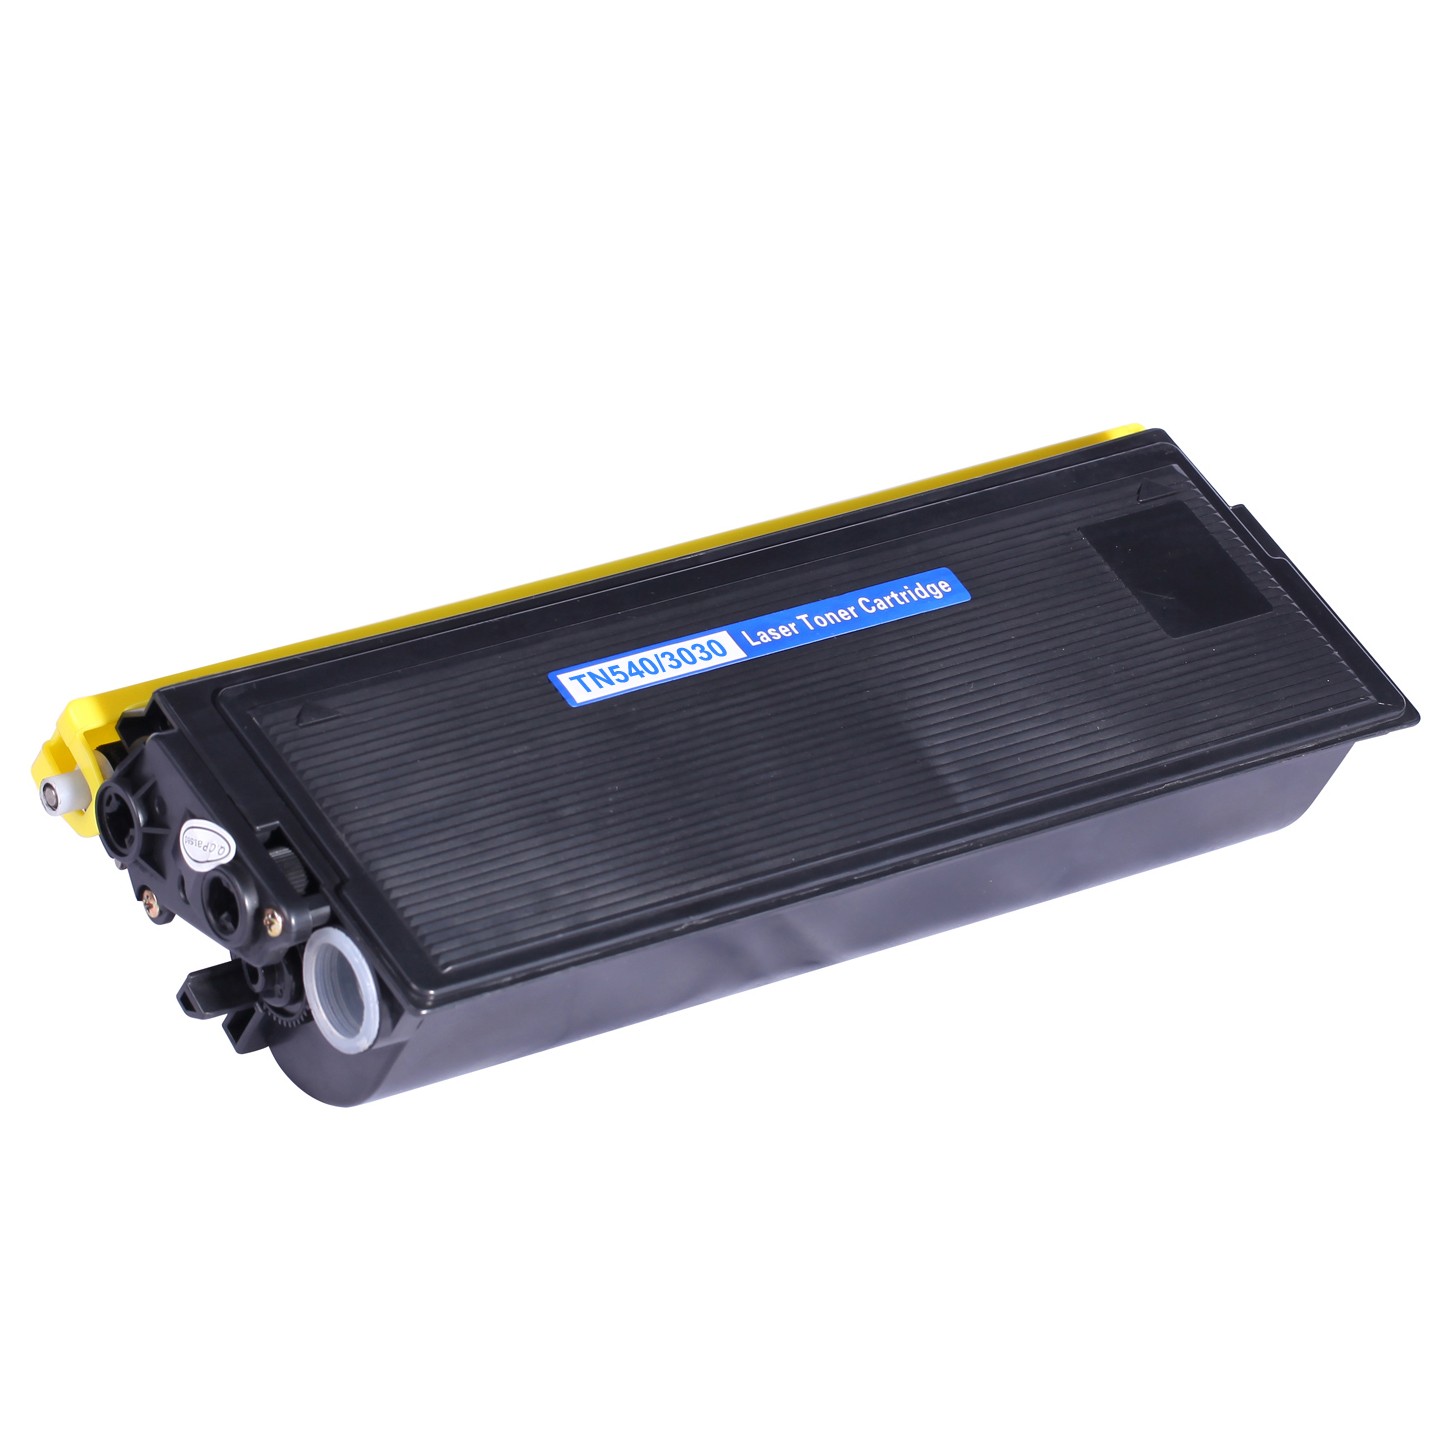 Compatible toner cartridge for Brother TN540/3030